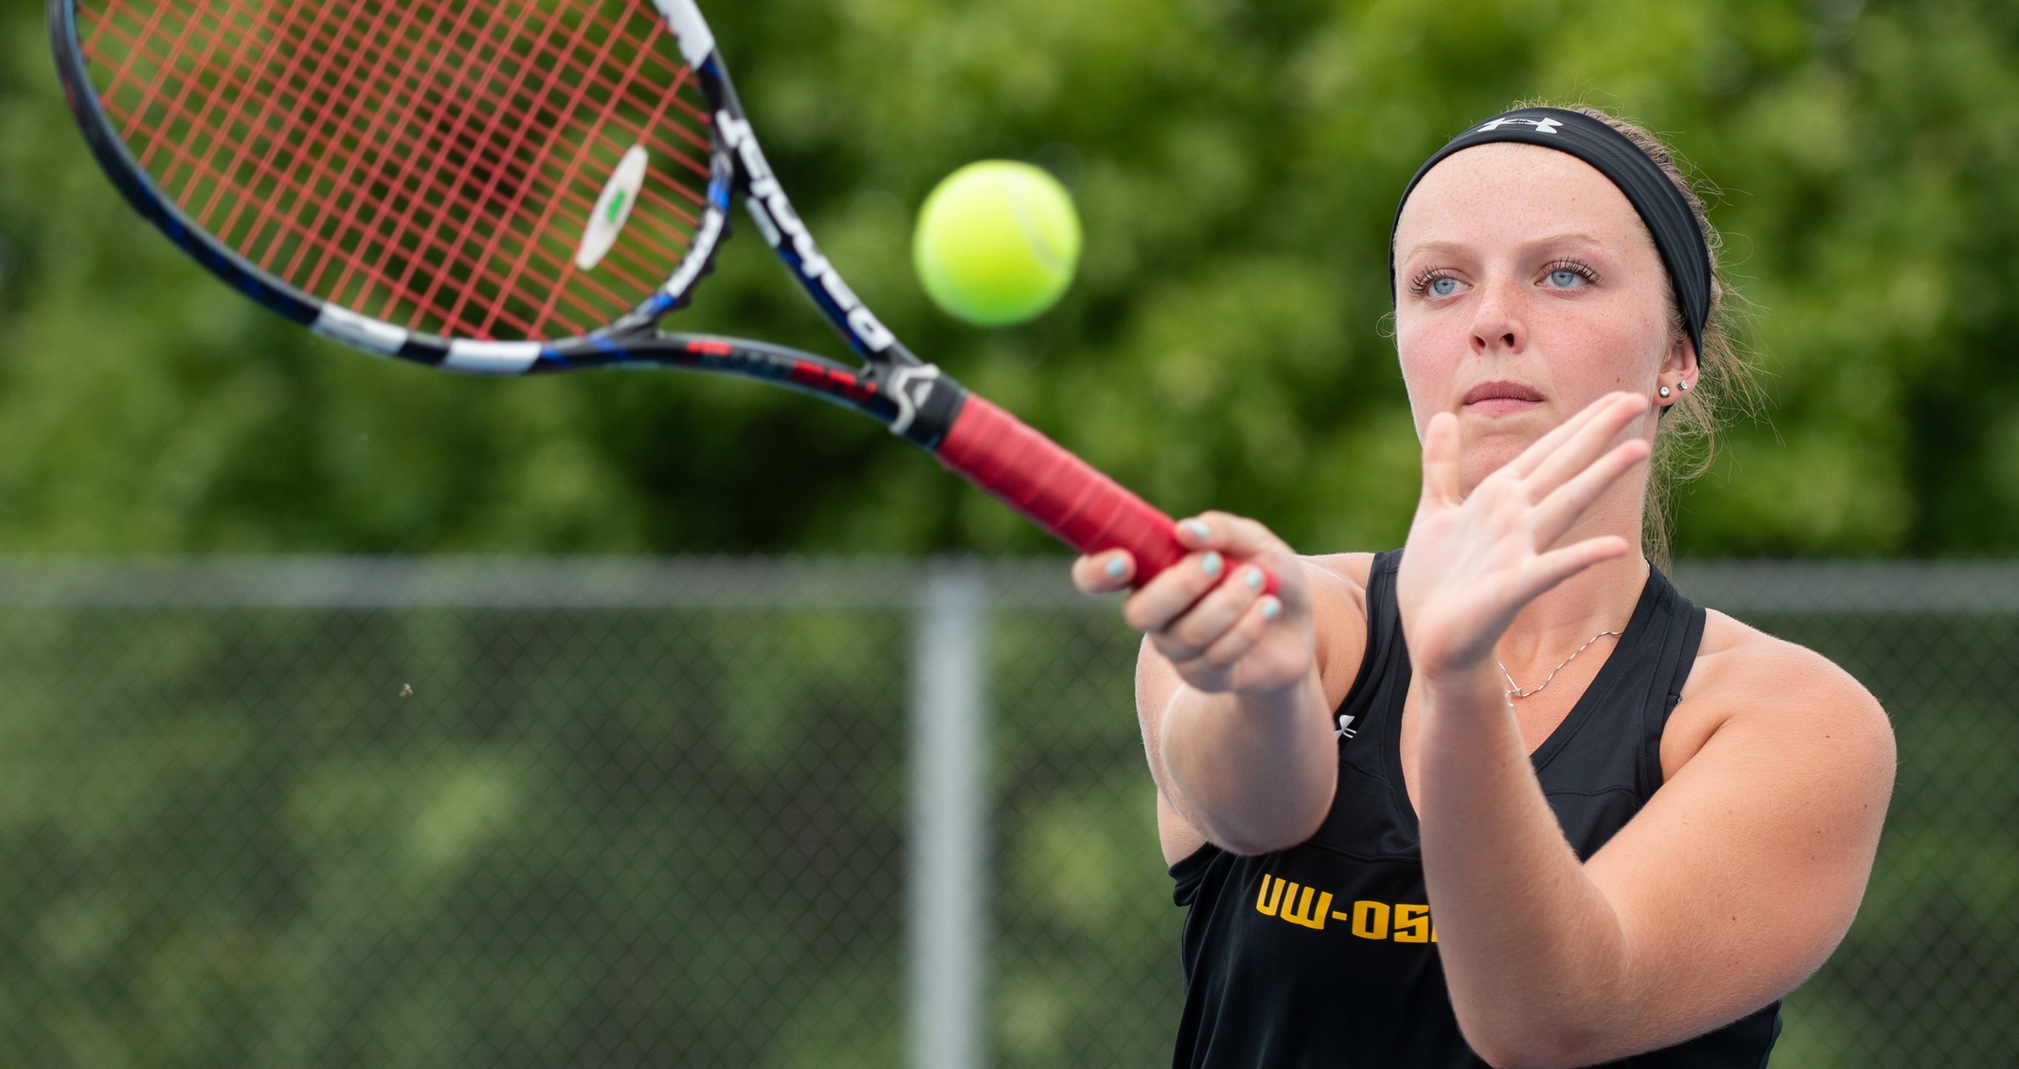 Evie Chitko teamed with Ashlee Polena to compile a 1-1 record at No. 3 doubles.